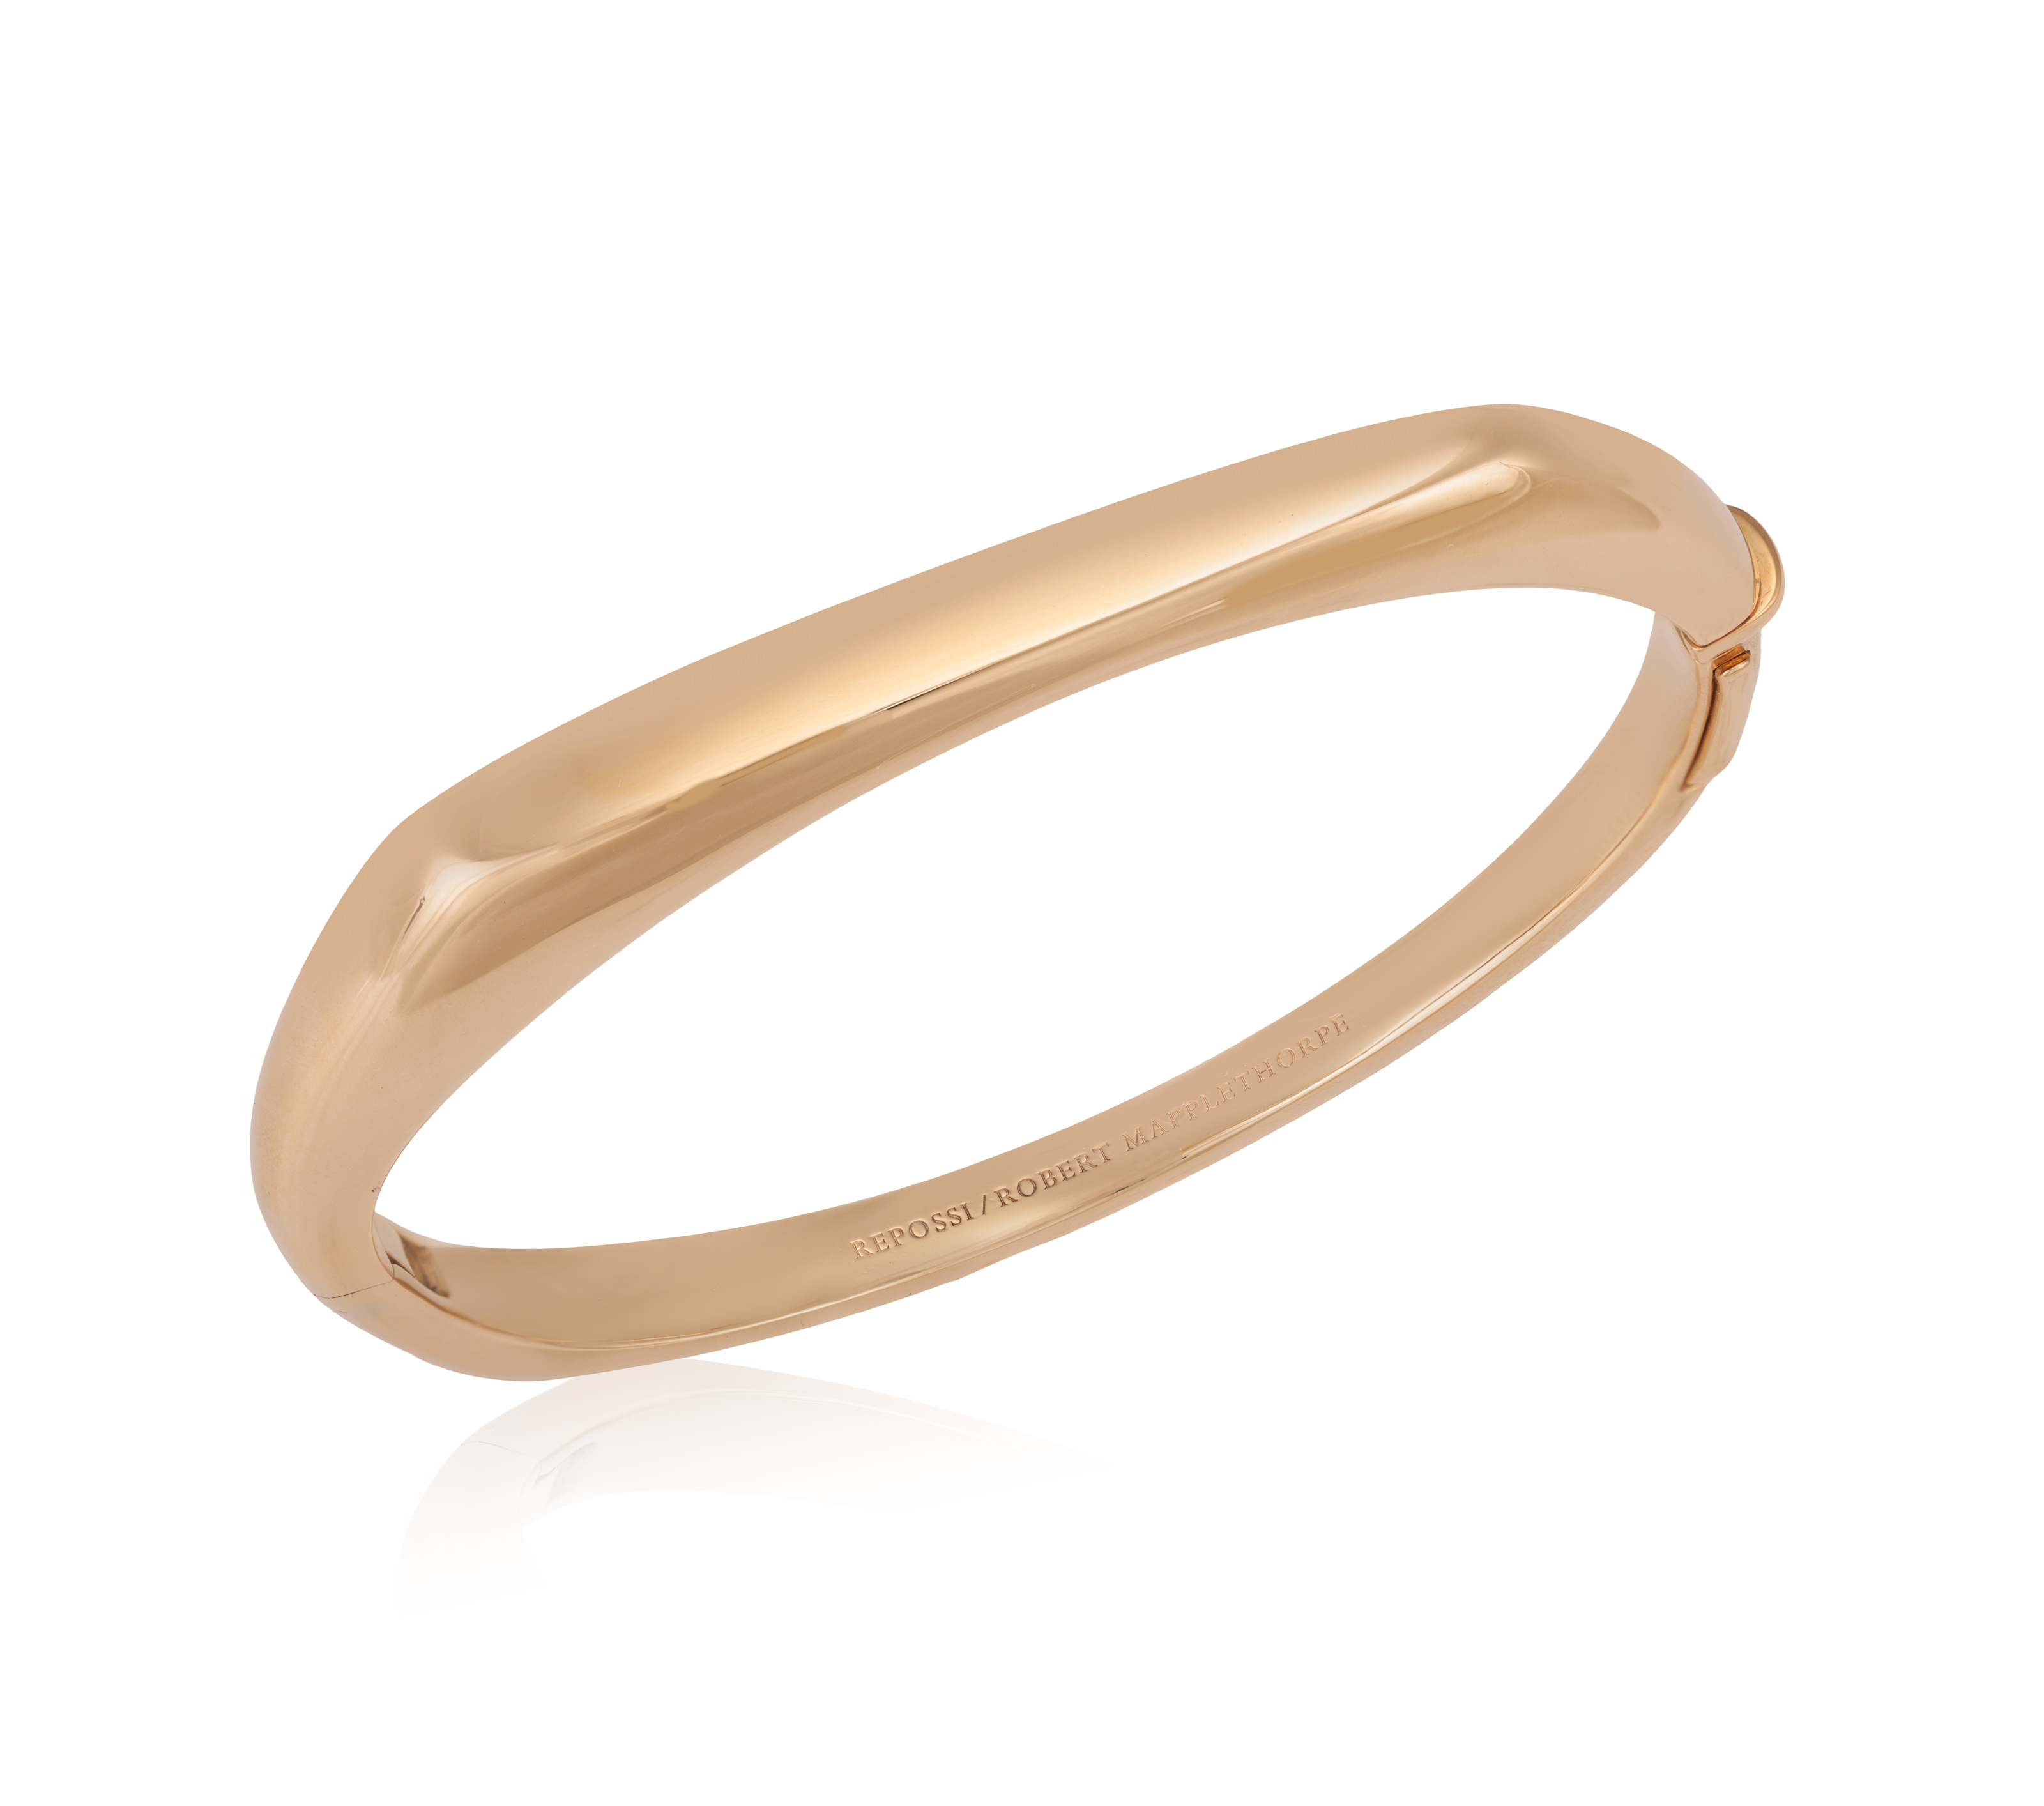 A GOLD 'ROBERT MAPPLETHORPE' BANGLE, DESIGNED BY GAIA REPOSSI, FOR REPOSSI Limited Edition, - Image 4 of 8